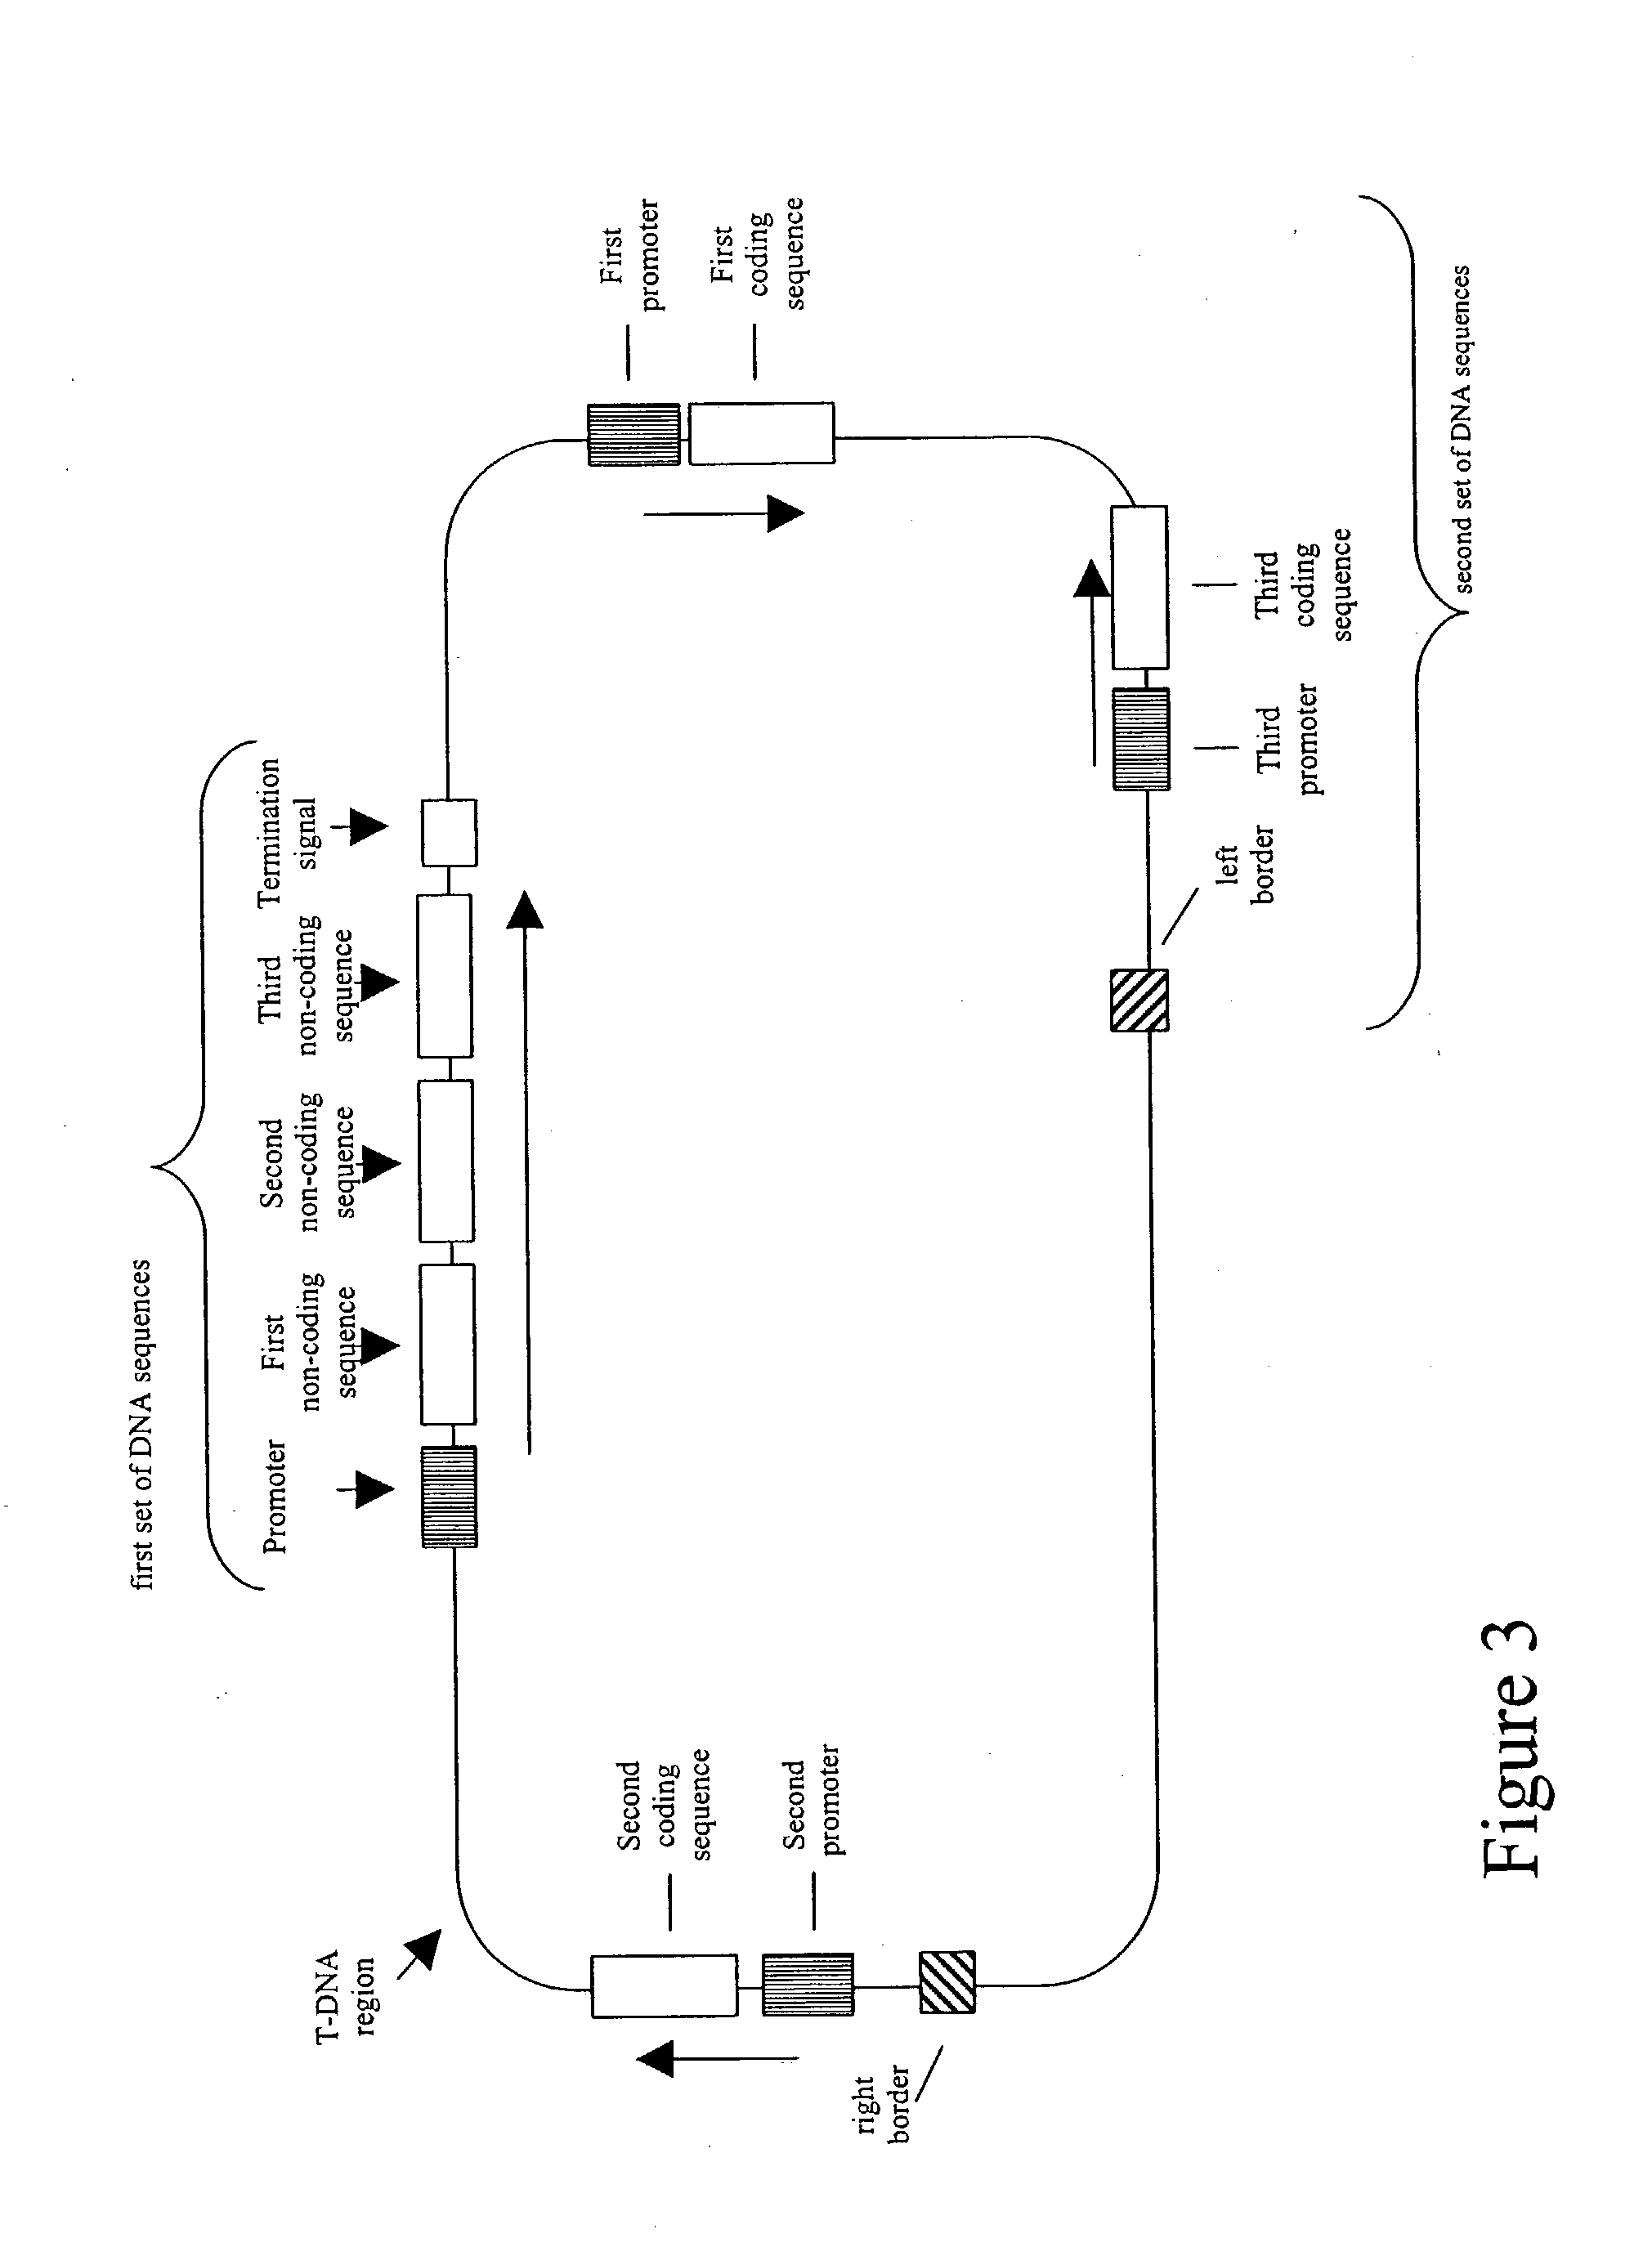 Nucleic acid constructs and methods for producing altered seed oil compositions